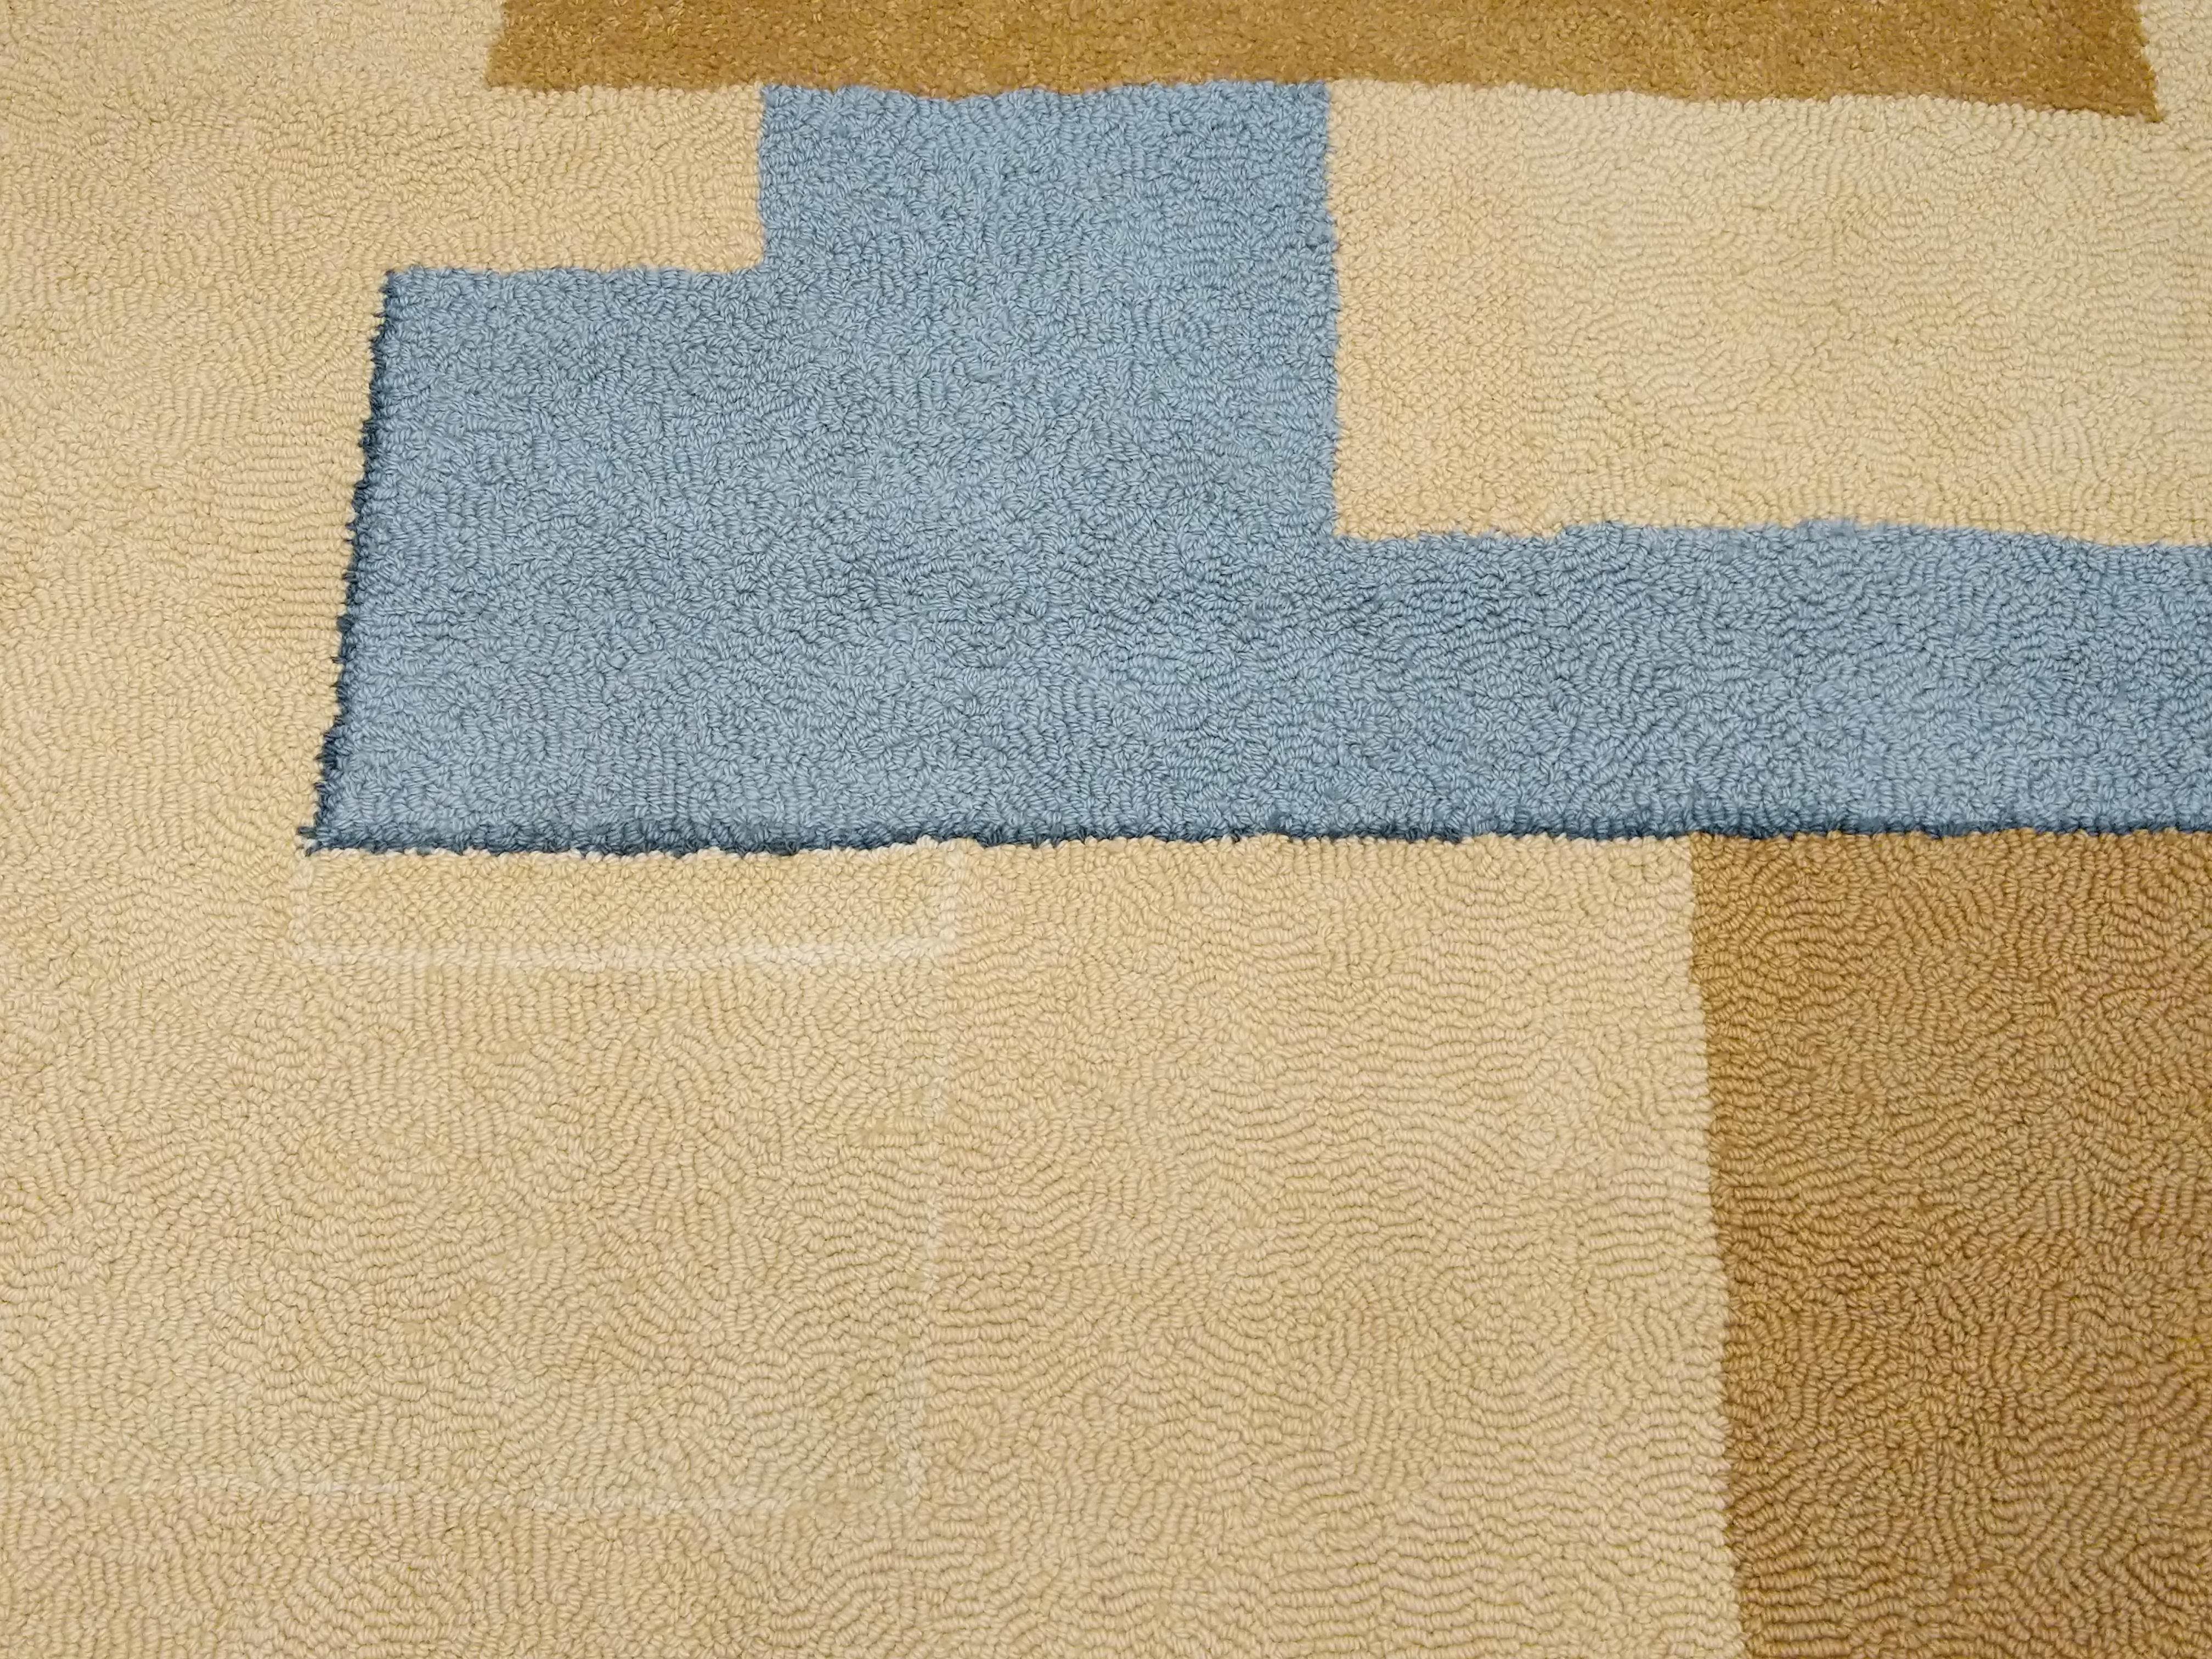 Wool Modernist Oversized Geometric Design American Hooked Rug For Sale